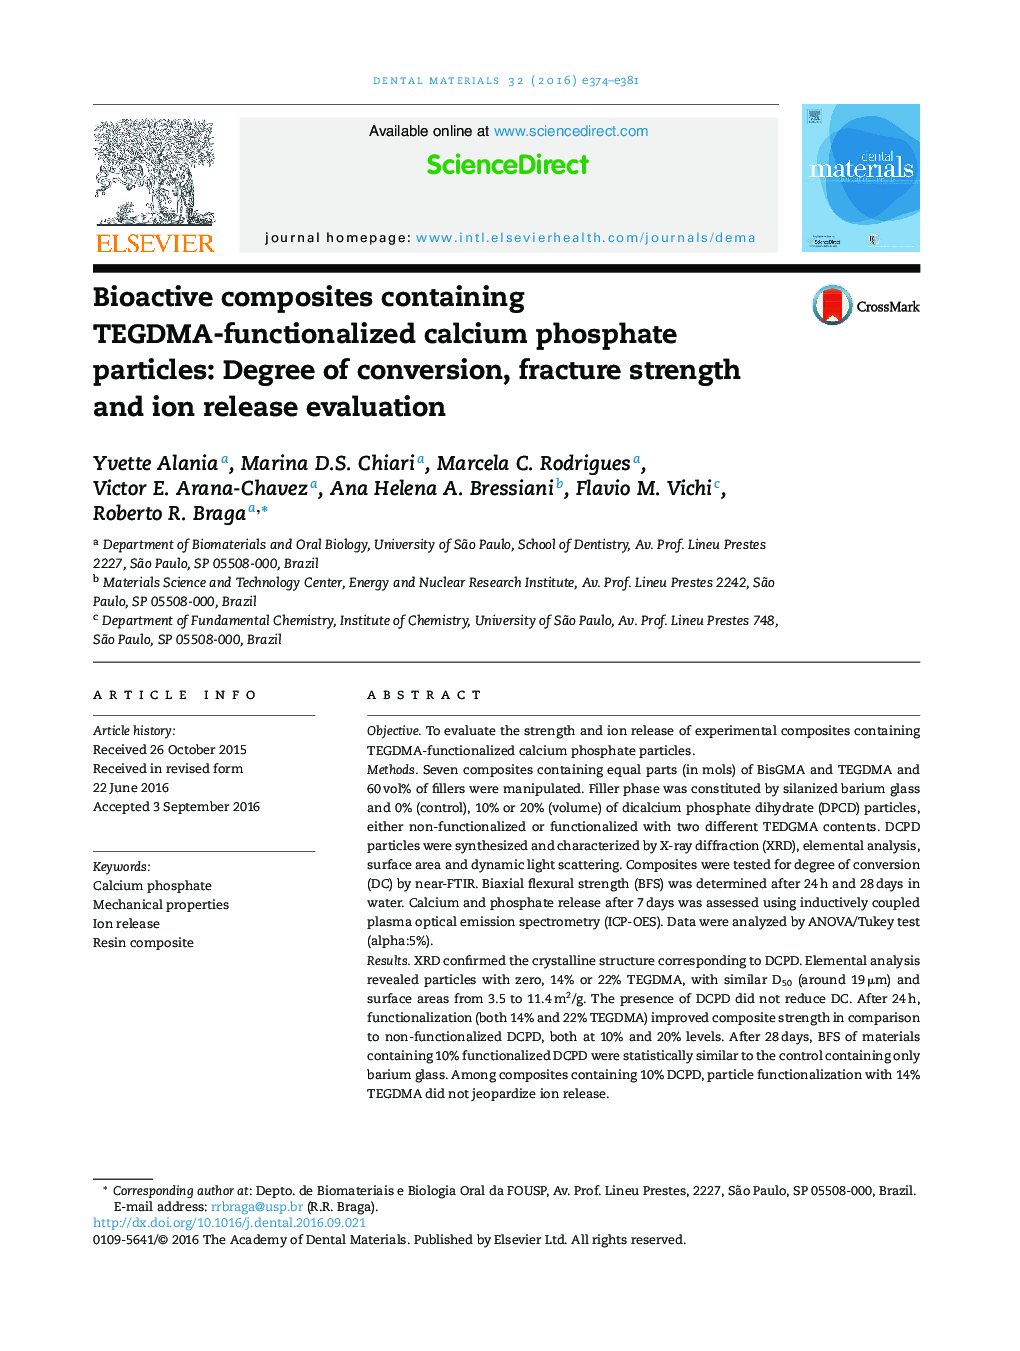 Bioactive composites containing TEGDMA-functionalized calcium phosphate particles: Degree of conversion, fracture strength and ion release evaluation